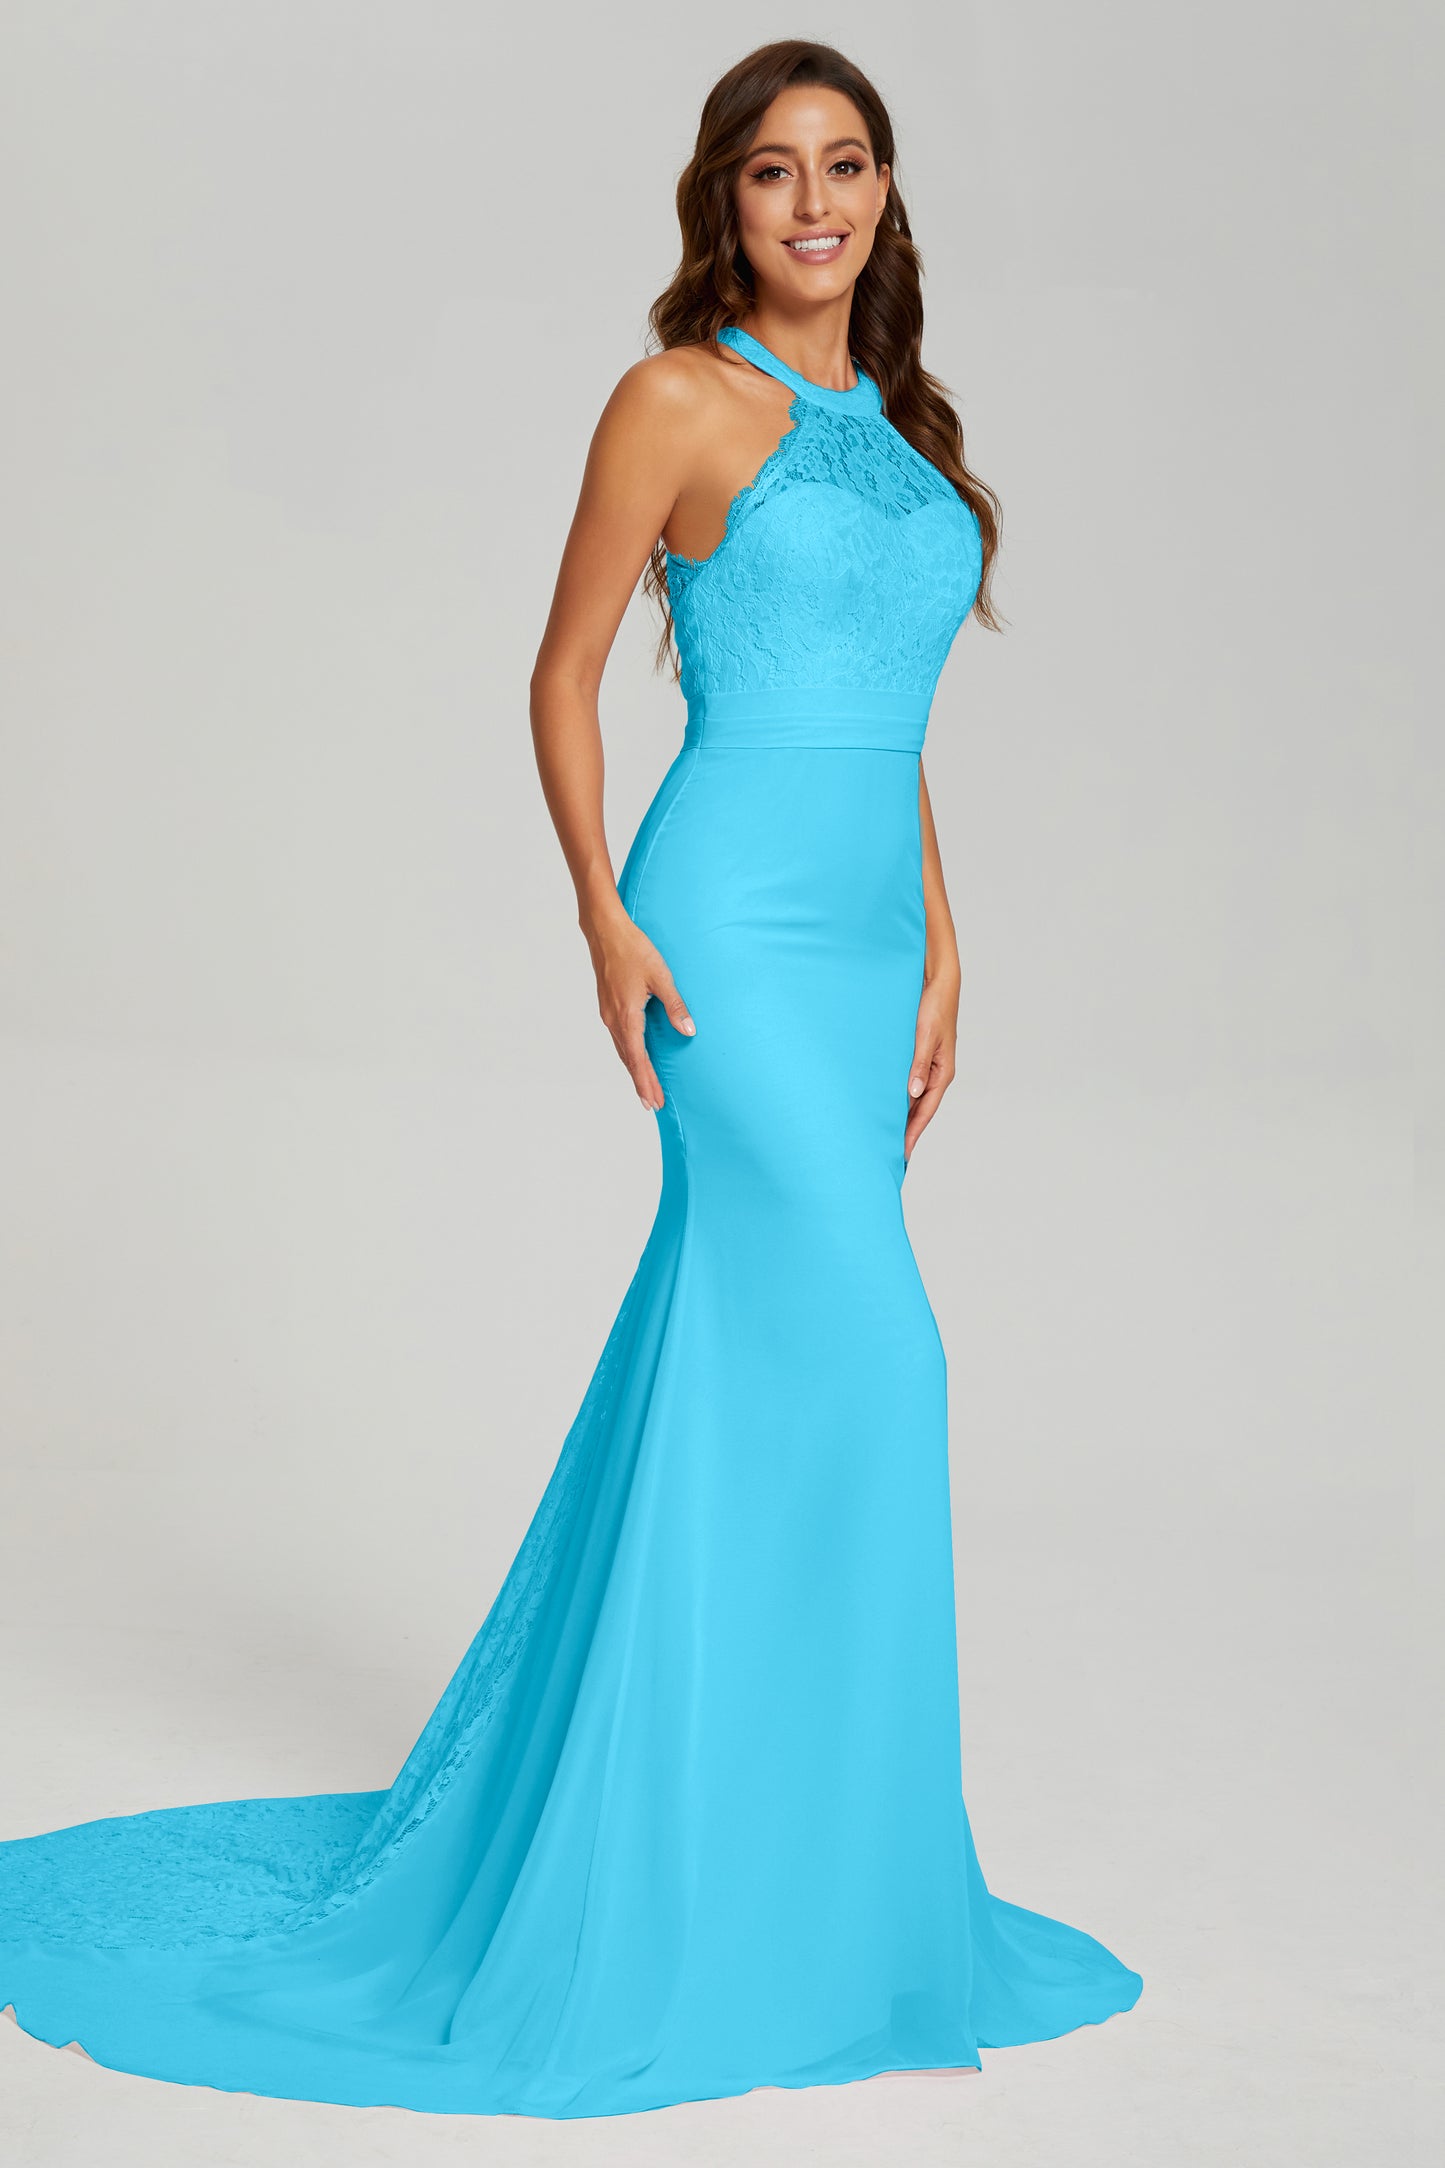 Mermaid Halter Lace Prom Dresses With Trailing